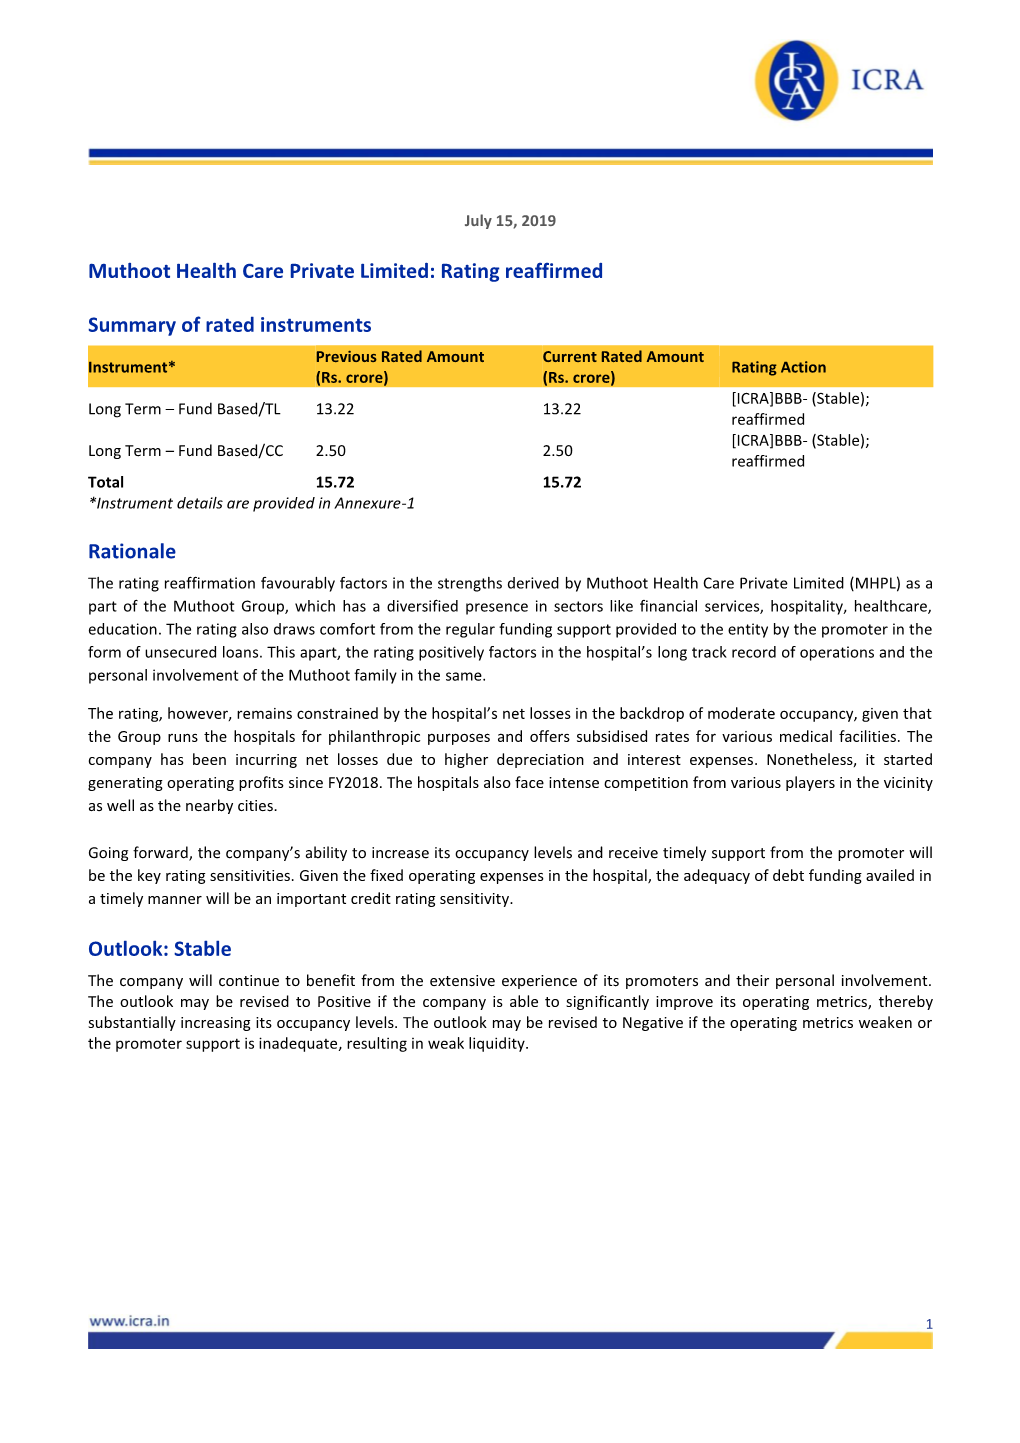 Muthoot Health Care Private Limited: Rating Reaffirmed